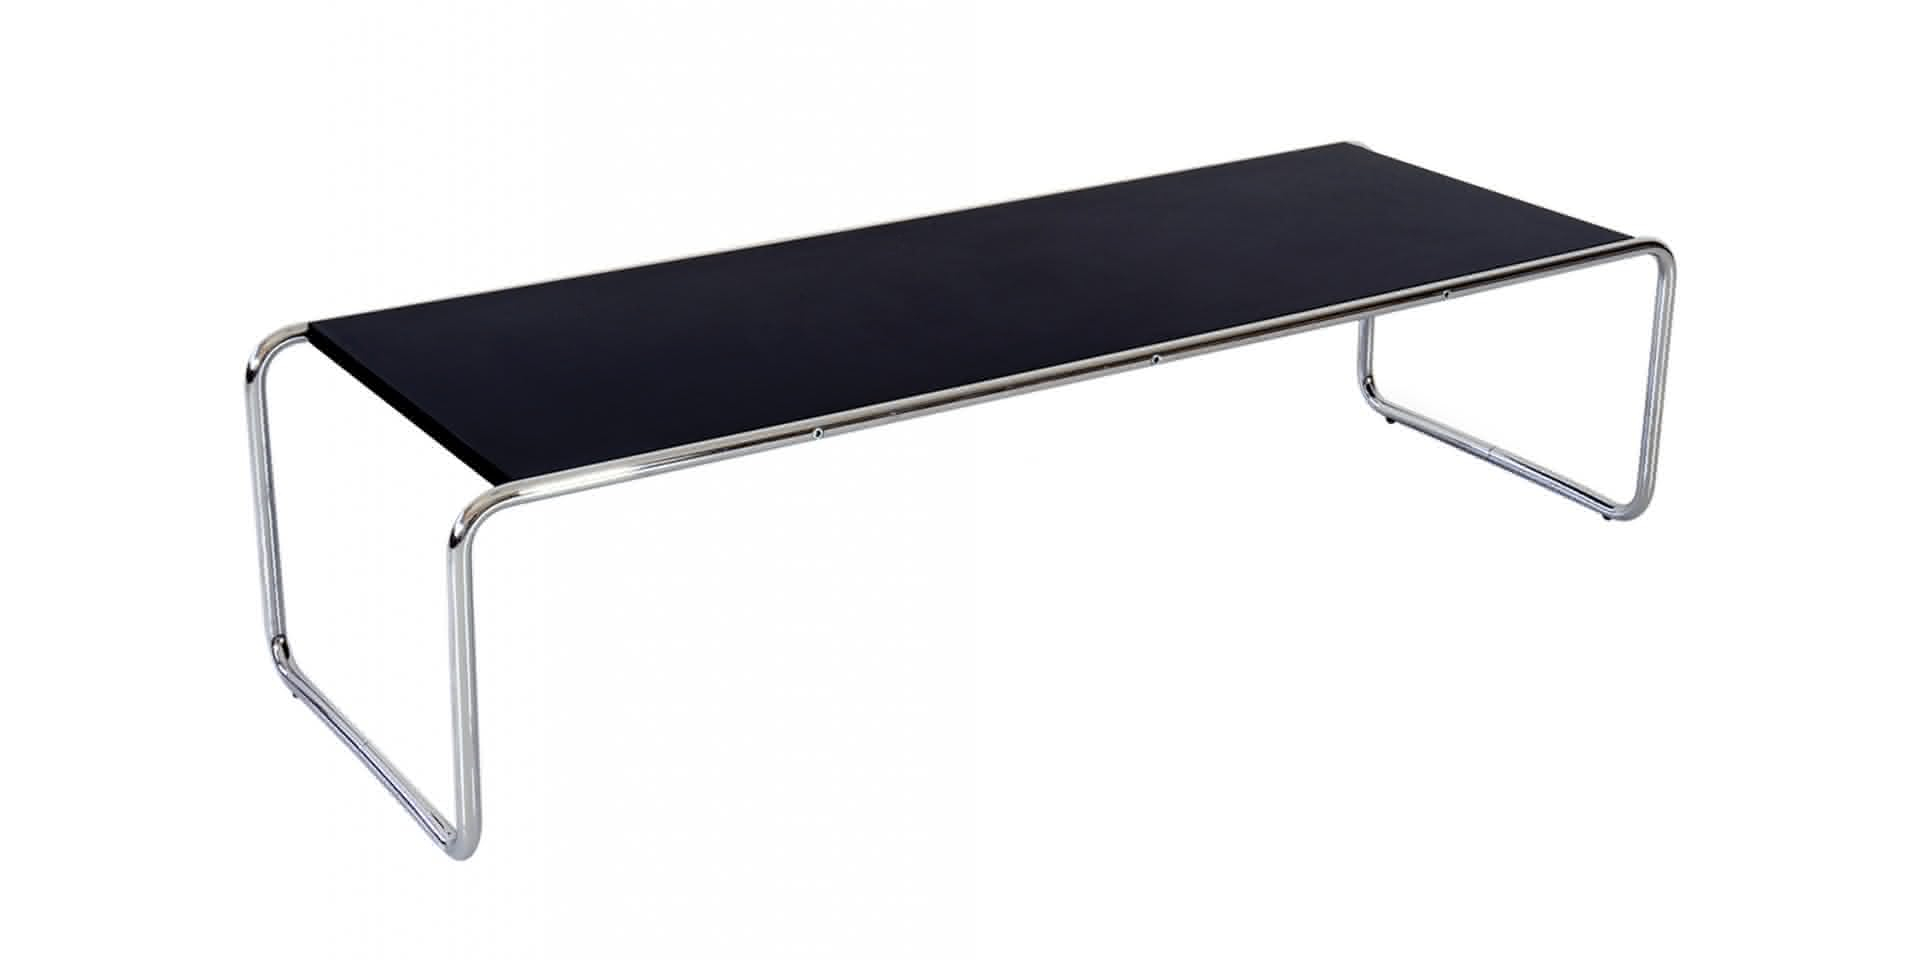 Table Marcel Breuer Laccio Coffee Table intended for measurements 1920 X 960